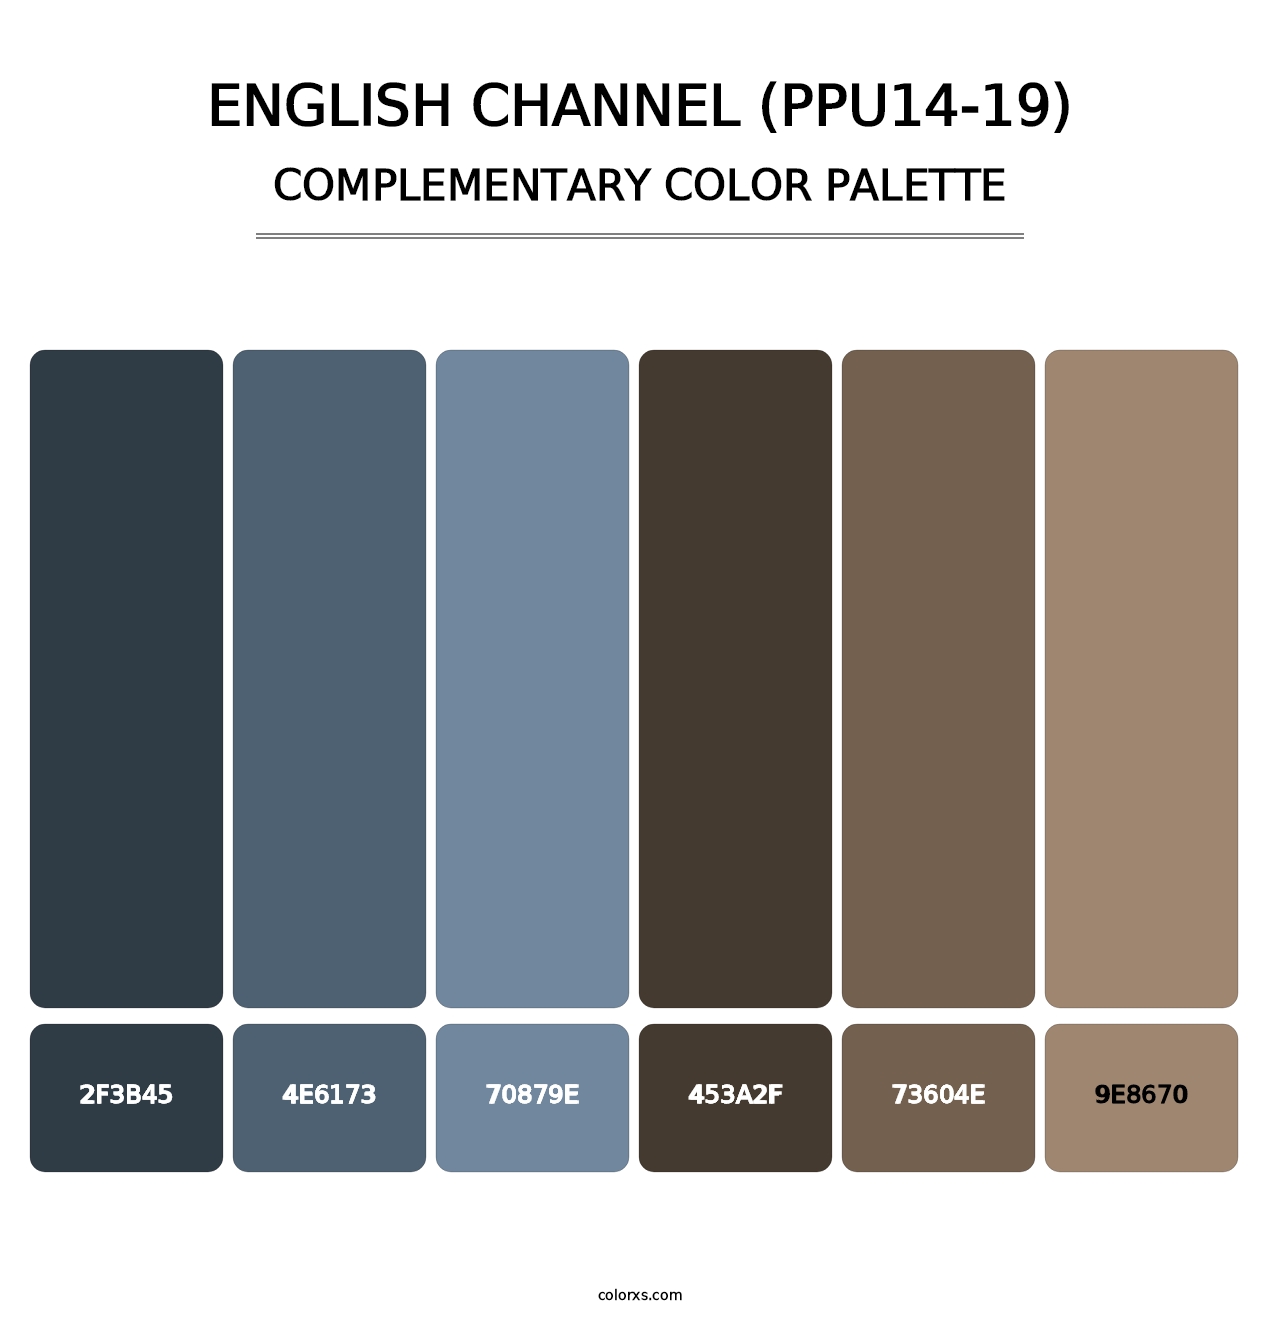 English Channel (PPU14-19) - Complementary Color Palette